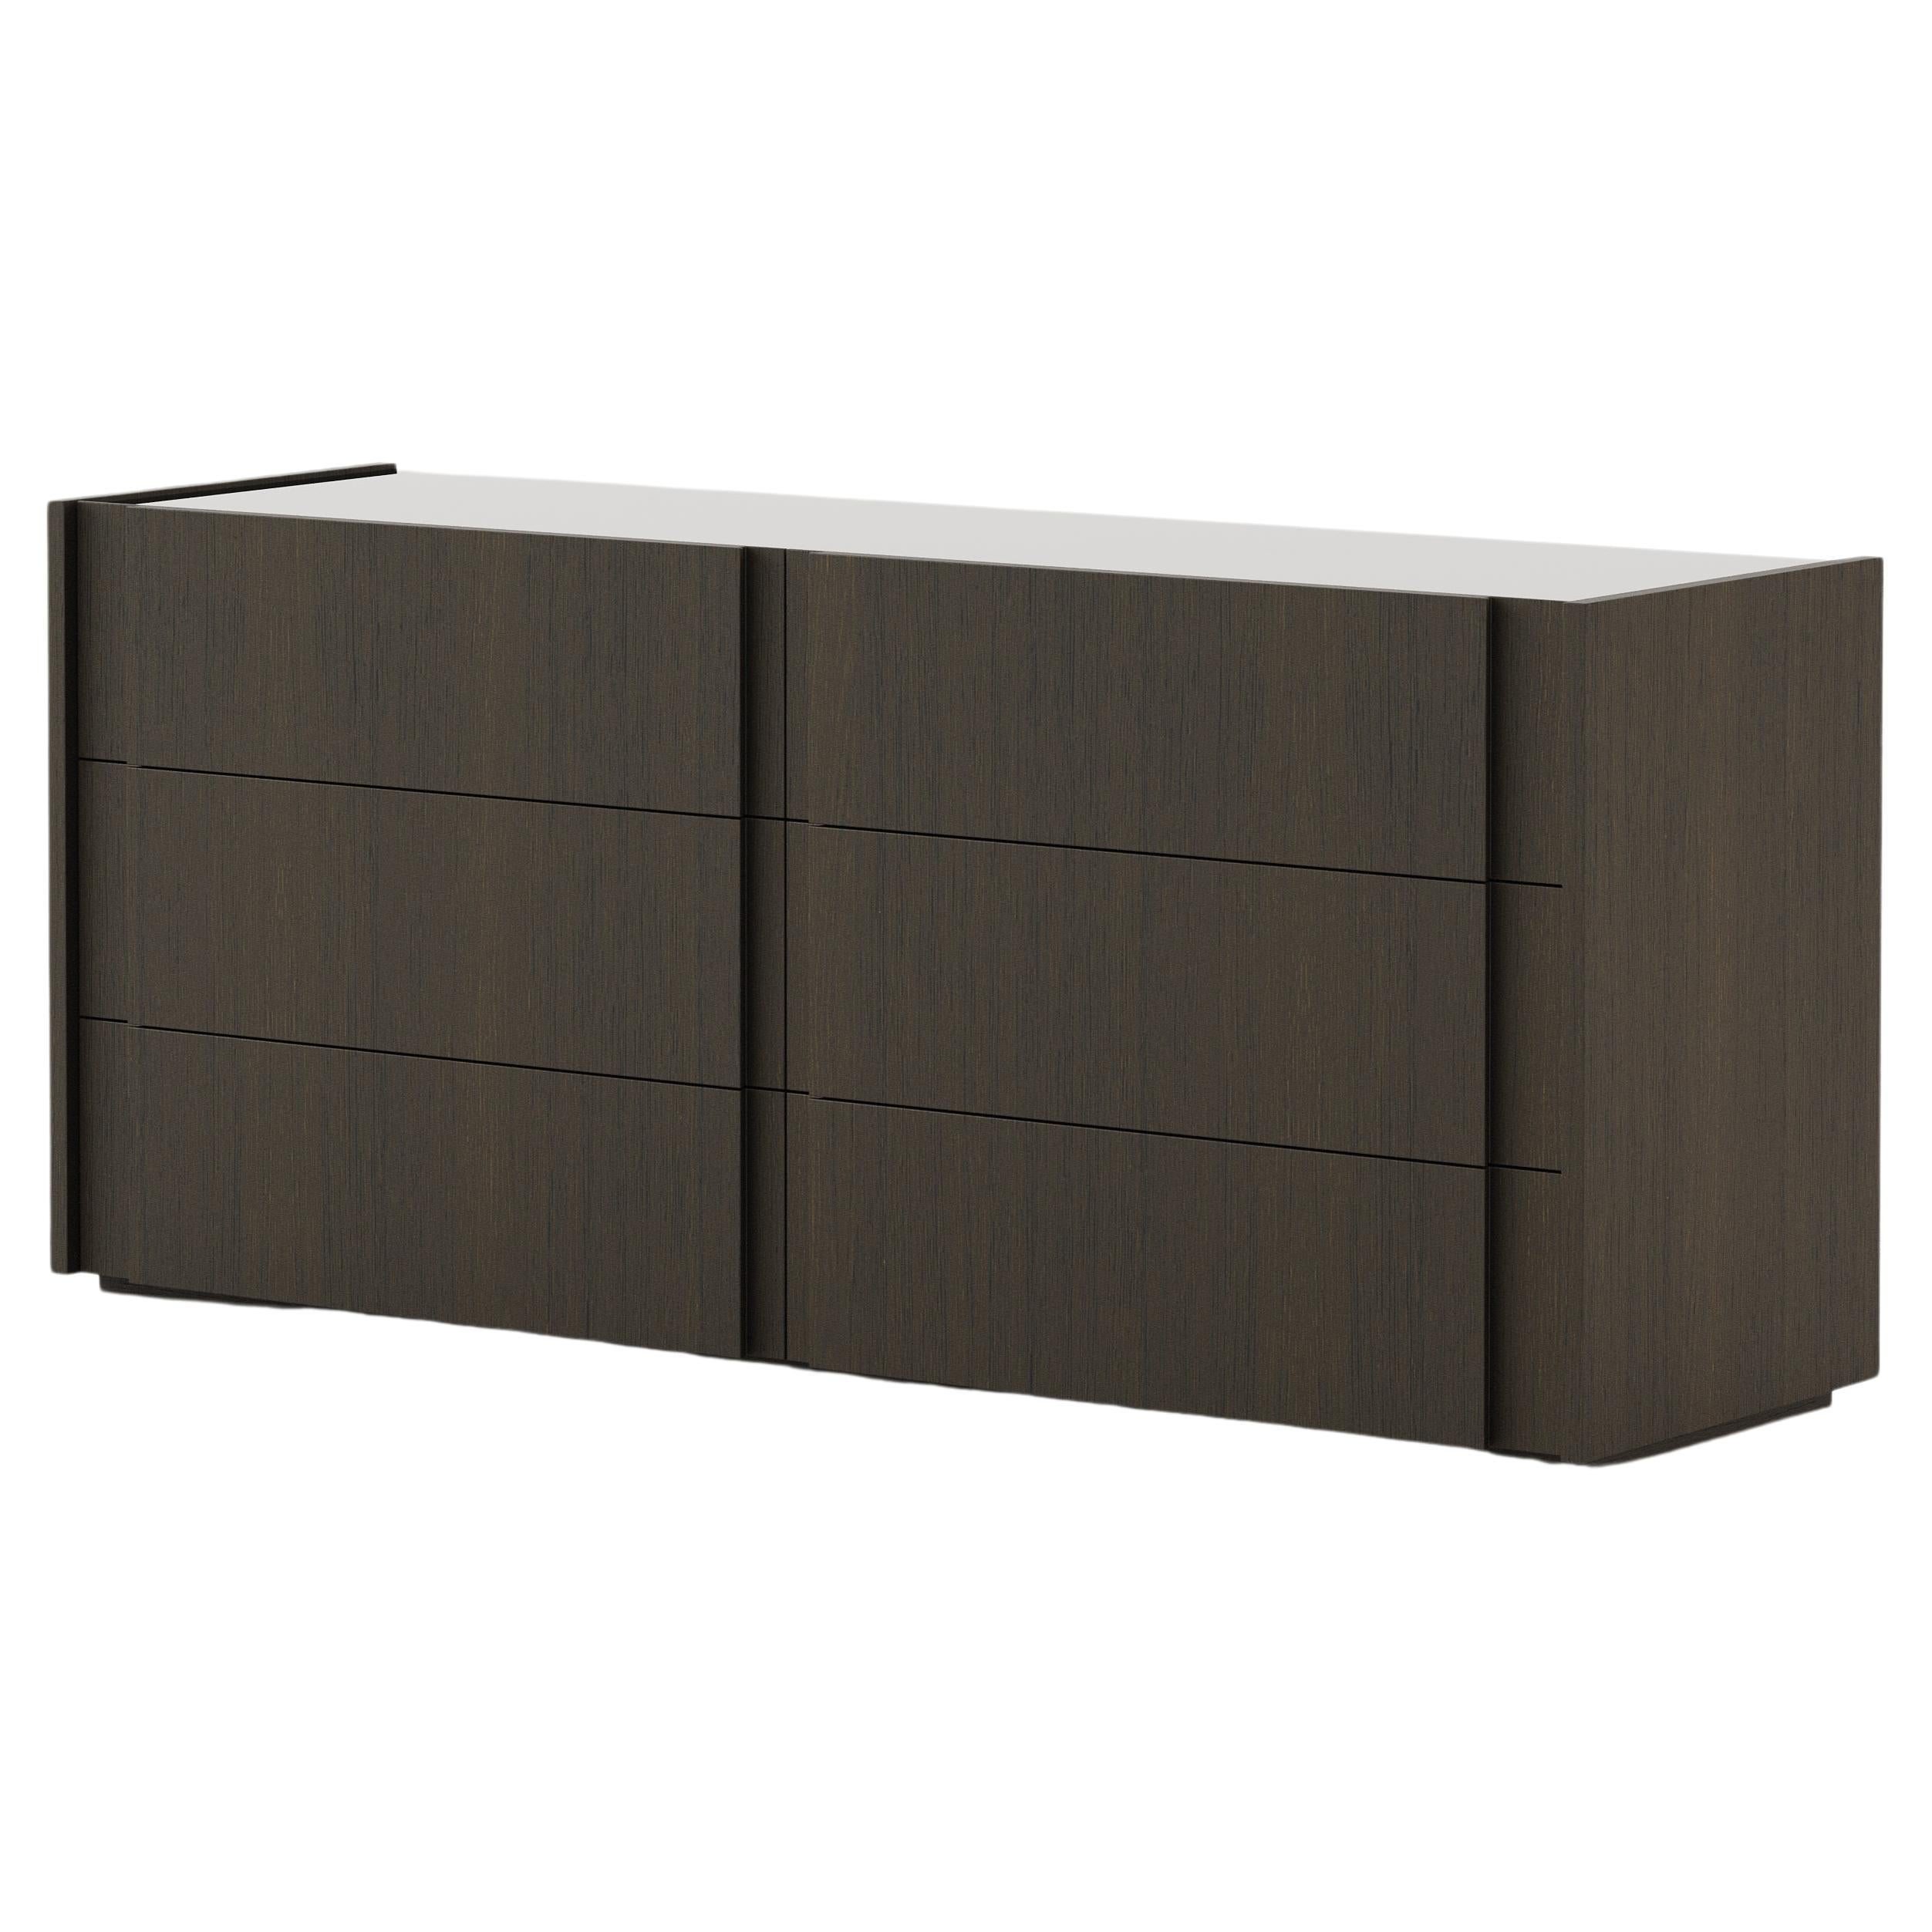 Modern Sevilha Chest of Drawers Made With Oak and Glass by Stylish Club For Sale